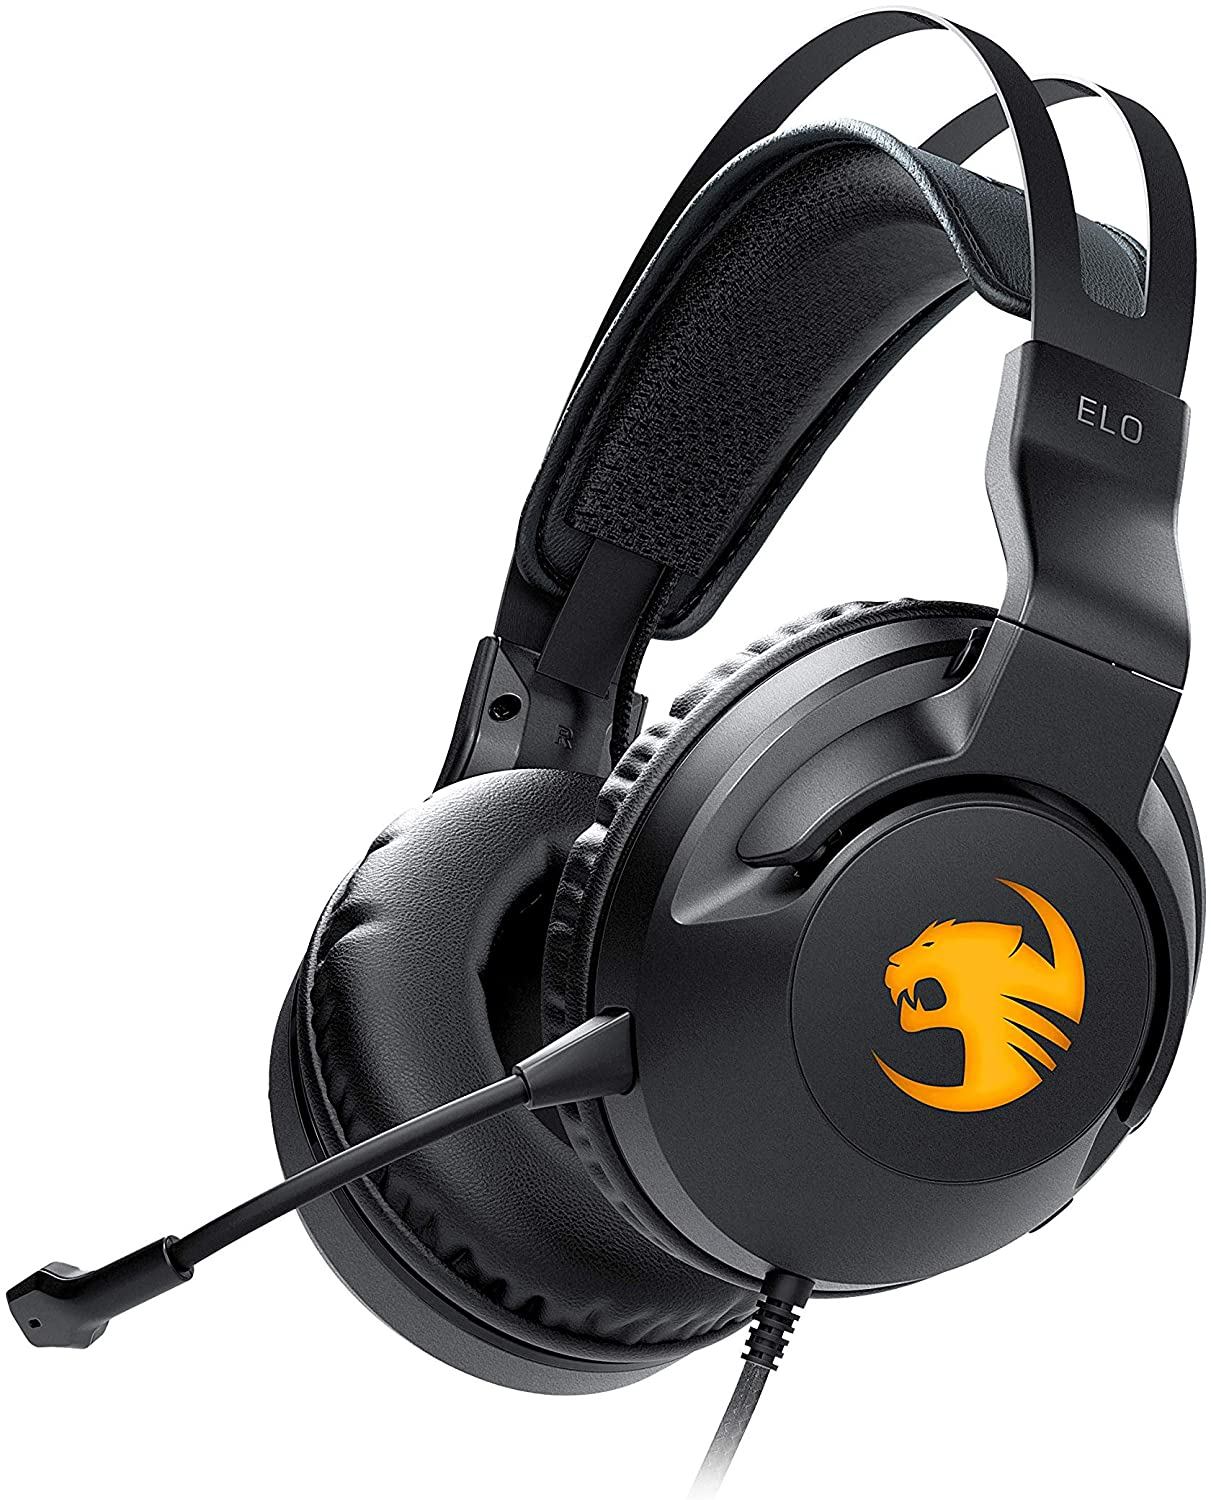 ROCCAT Elo 7.1 USB PC Gaming Headset - Surround Sound with AIMO RGB Lighting - Wired Computer Headphones $39.99